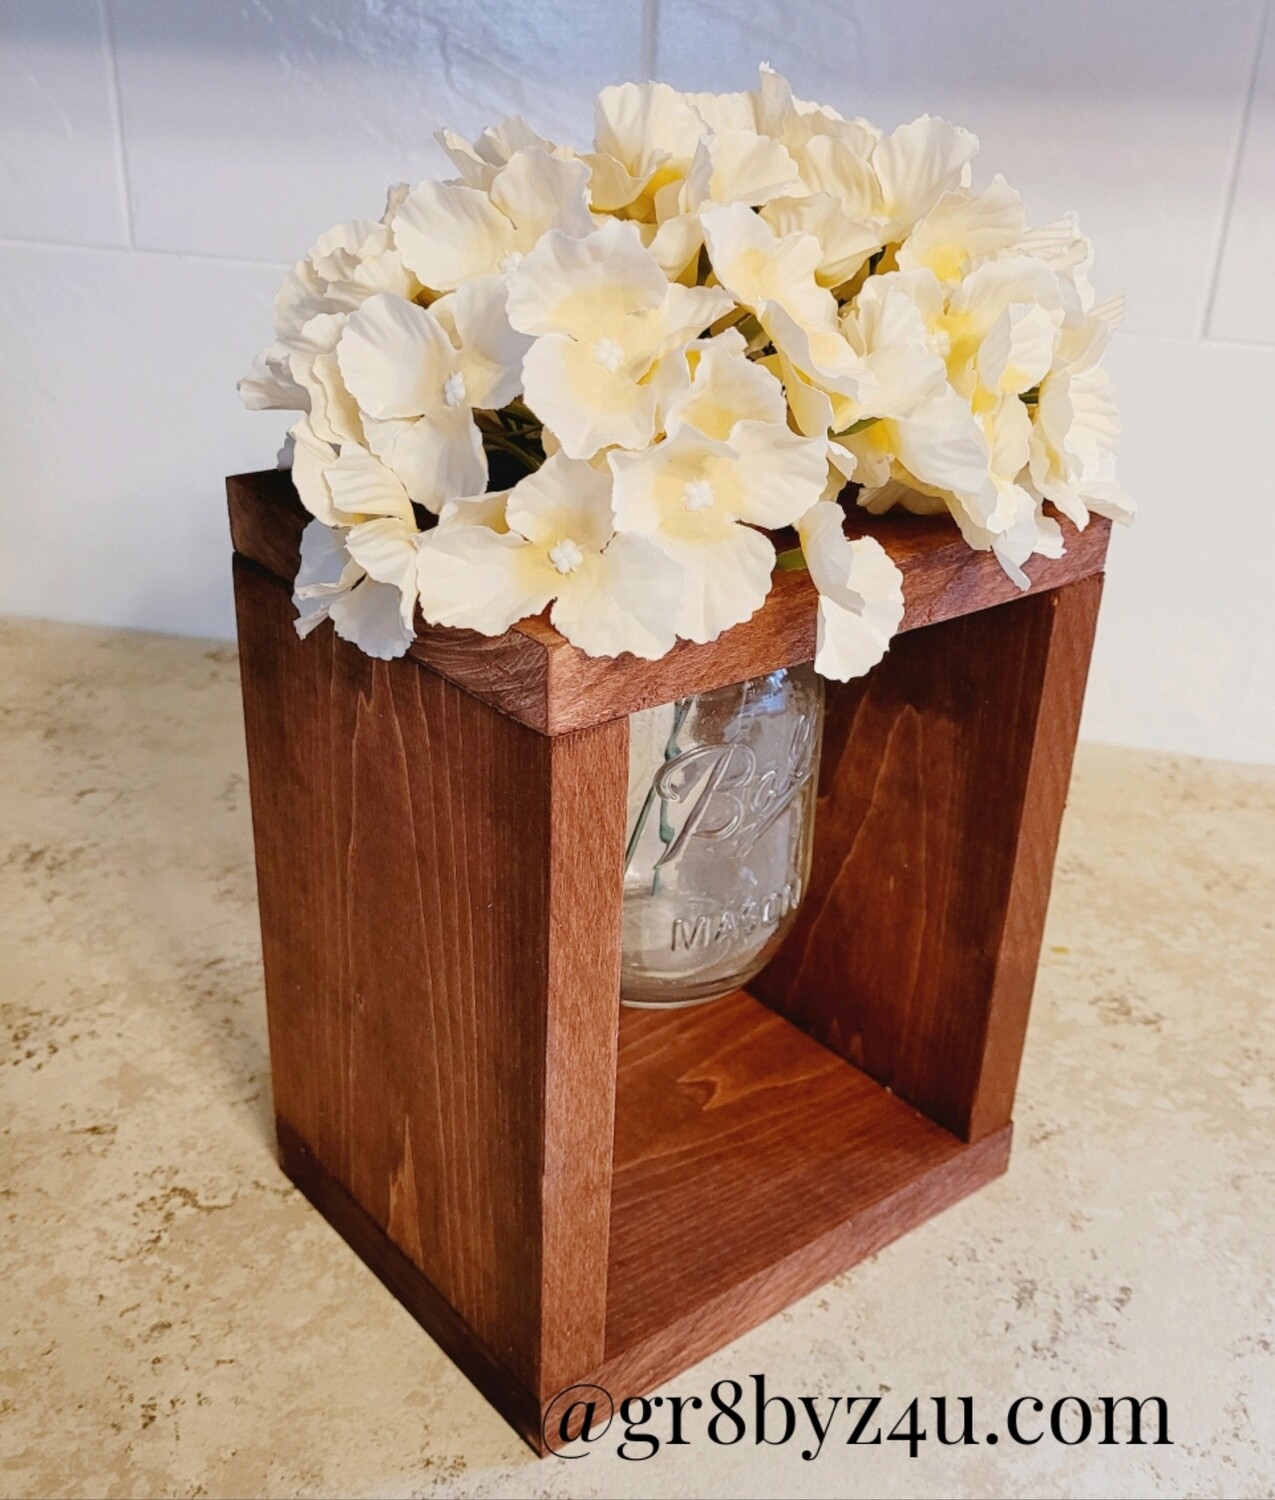 Mason Holder Box | Wooden Boxes for Centerpieces | Planter | Flower Rustic Pot Holder | Square Vases for Wedding | Rustic | Farmhouse